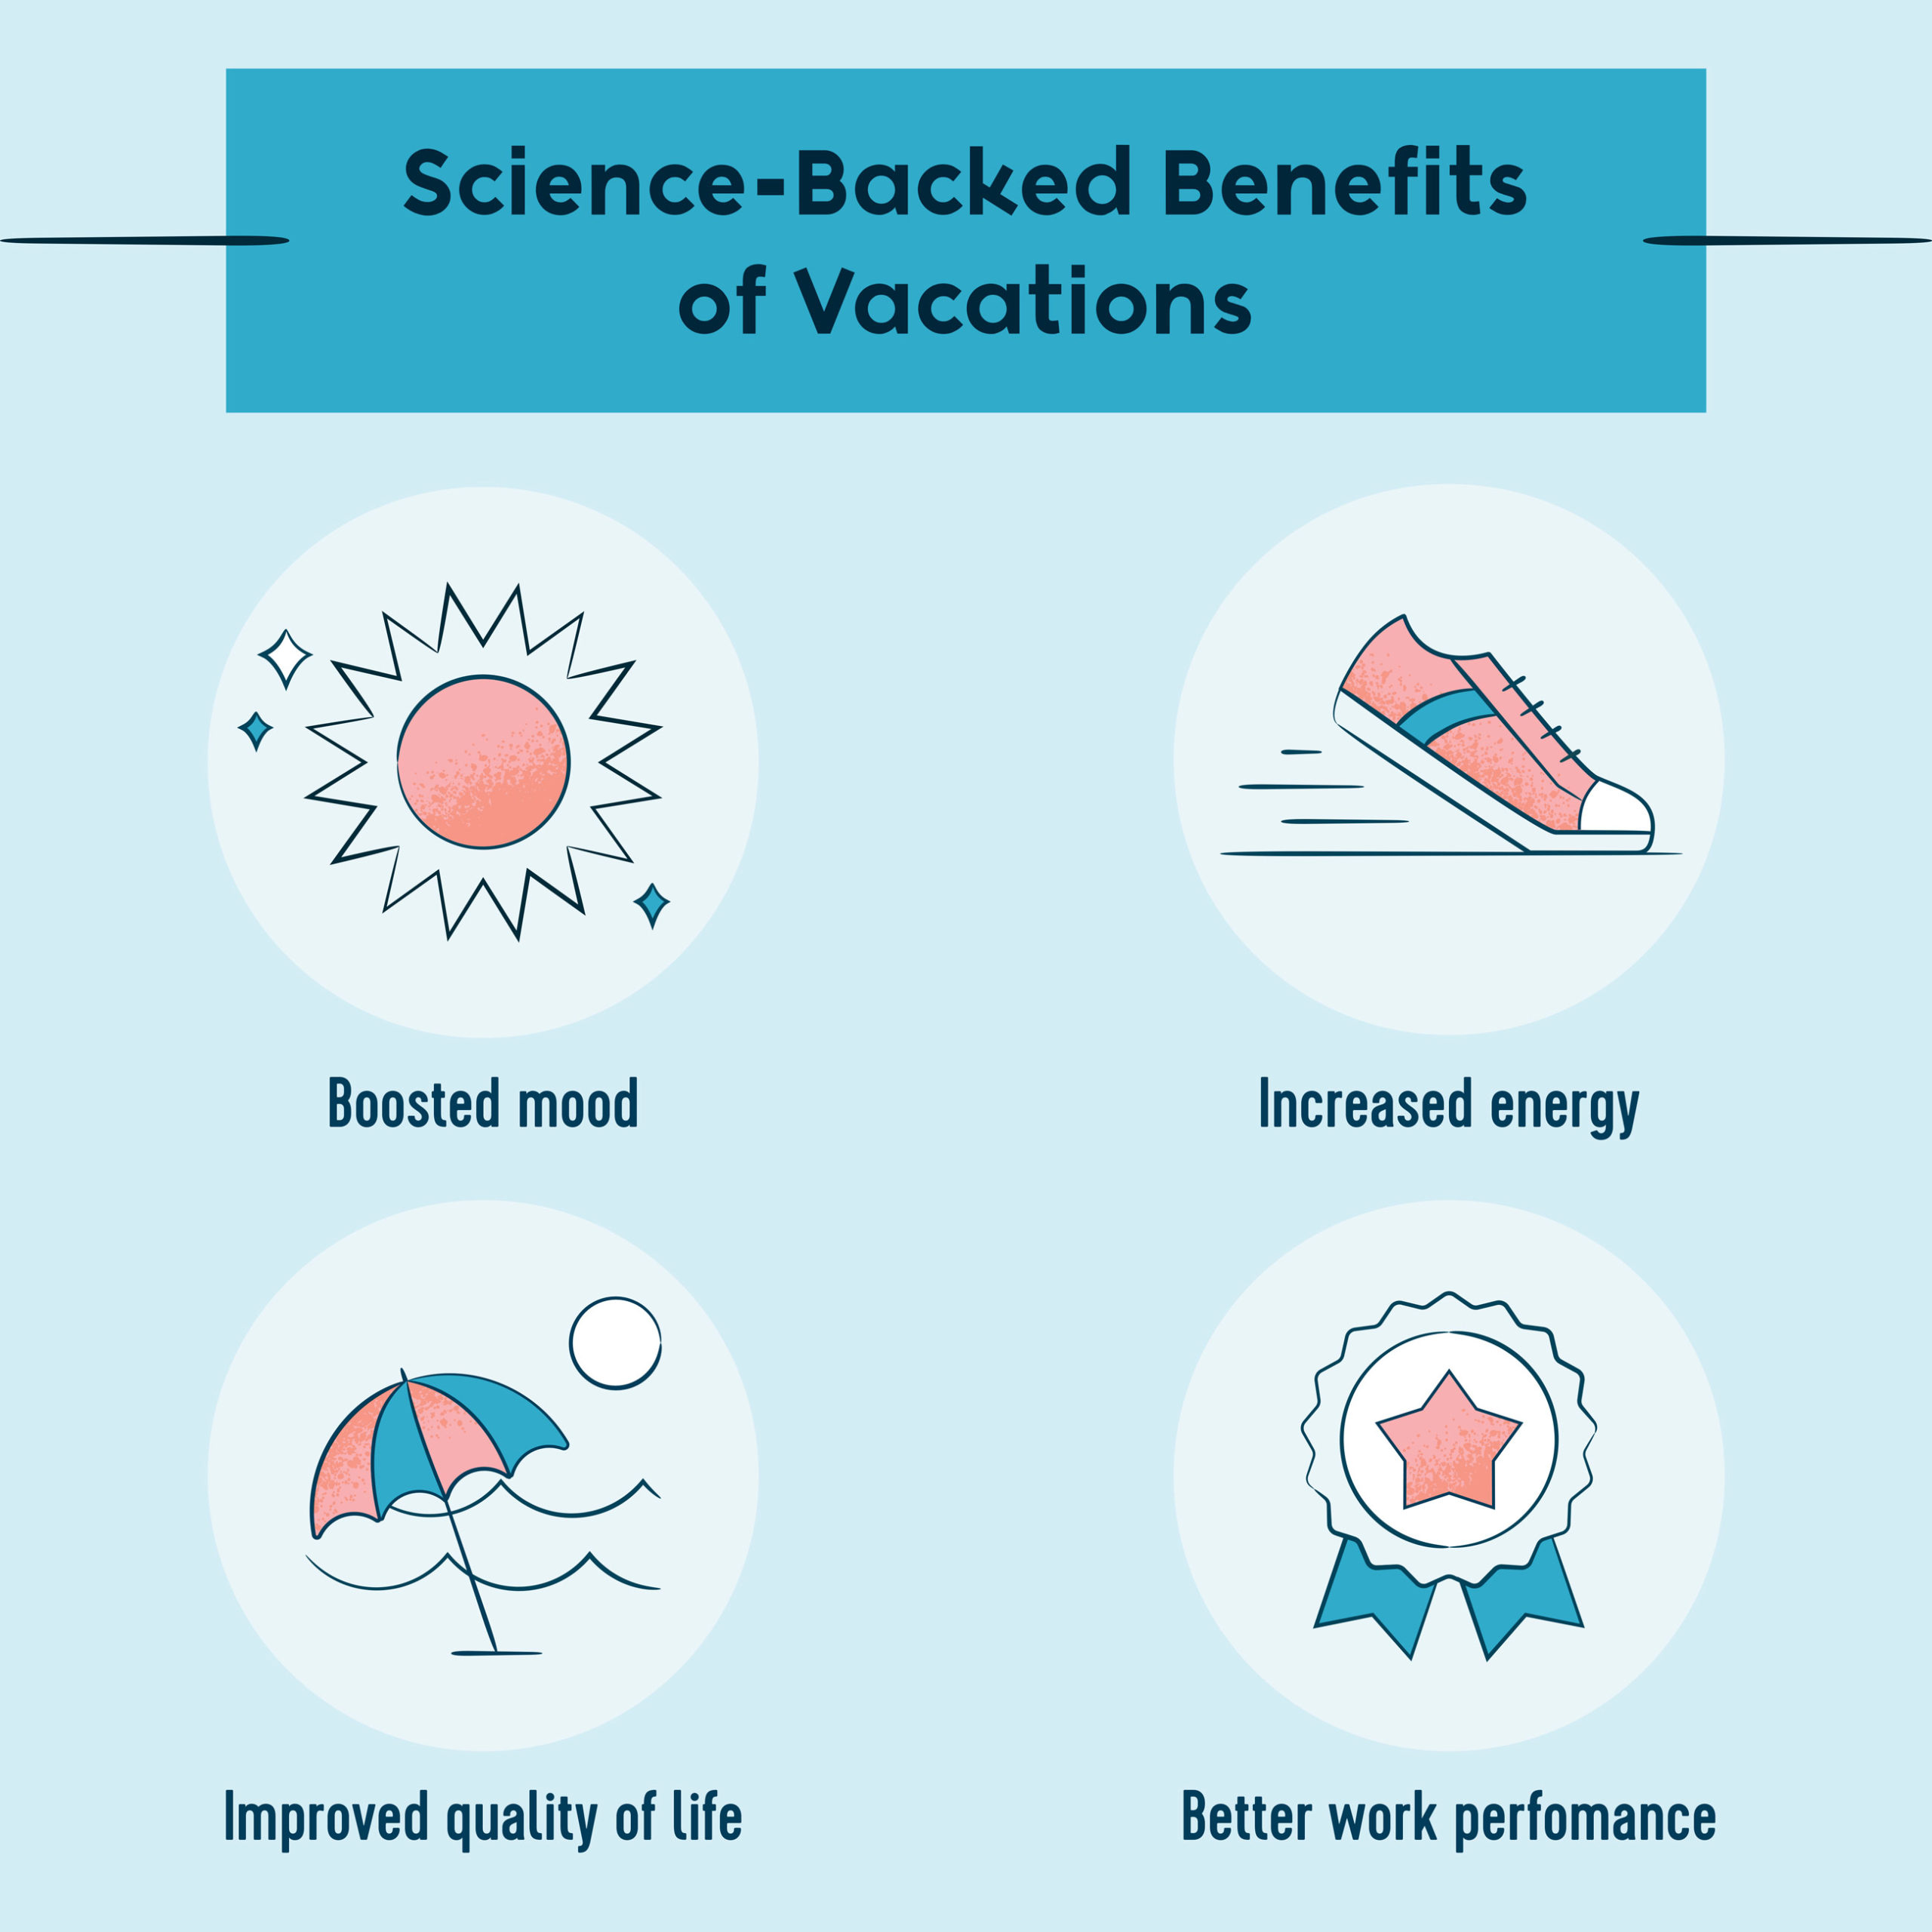 science-backed benefits of vacations - boosted moos, increased energy, improved quality of life and better work performance 